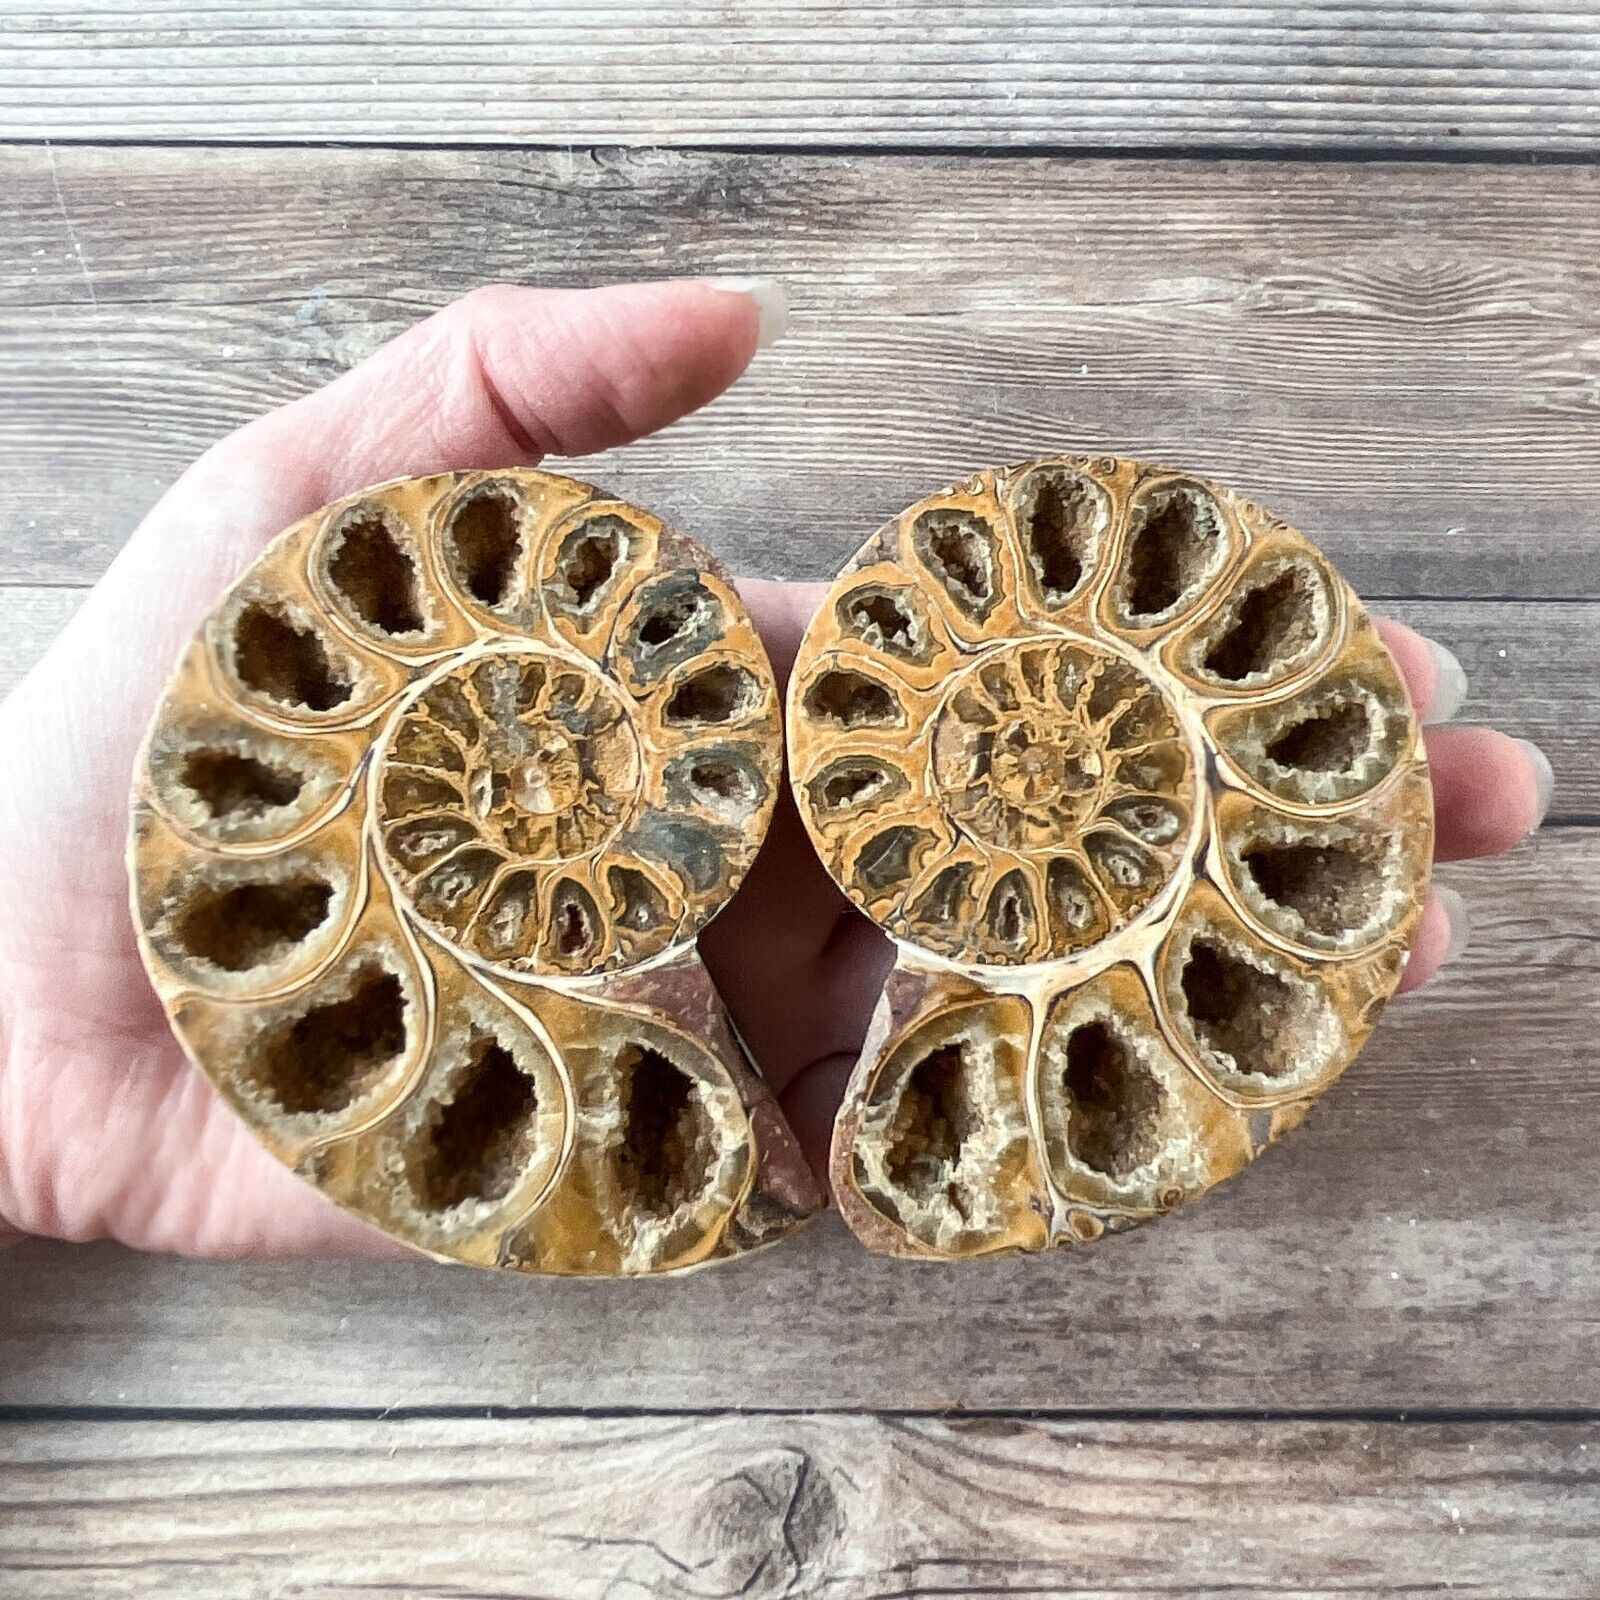 Ammonite Fossil Pair with Calcite Chambers 176g, Polished